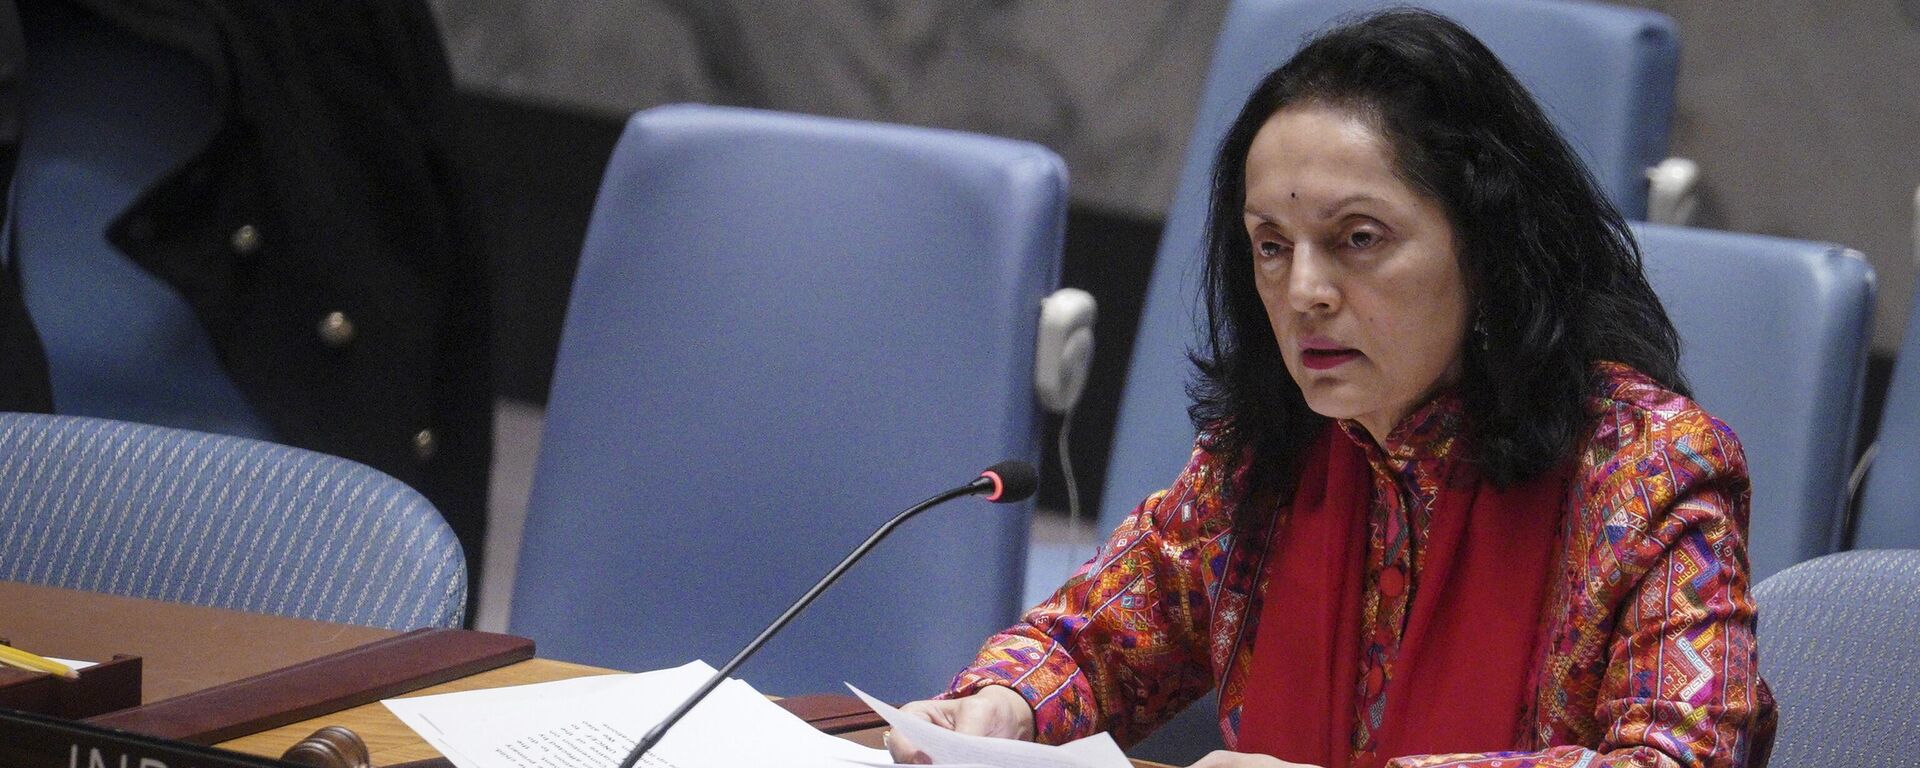 India's Ambassador to the United Nations Ruchira Kamboj, current president of the U.N. Security Council, address the council after a report on the humanitarian impact of Russia's war in Ukraine, Tuesday Dec. 6, 2022 at U.N. headquarters. - Sputnik भारत, 1920, 24.09.2023